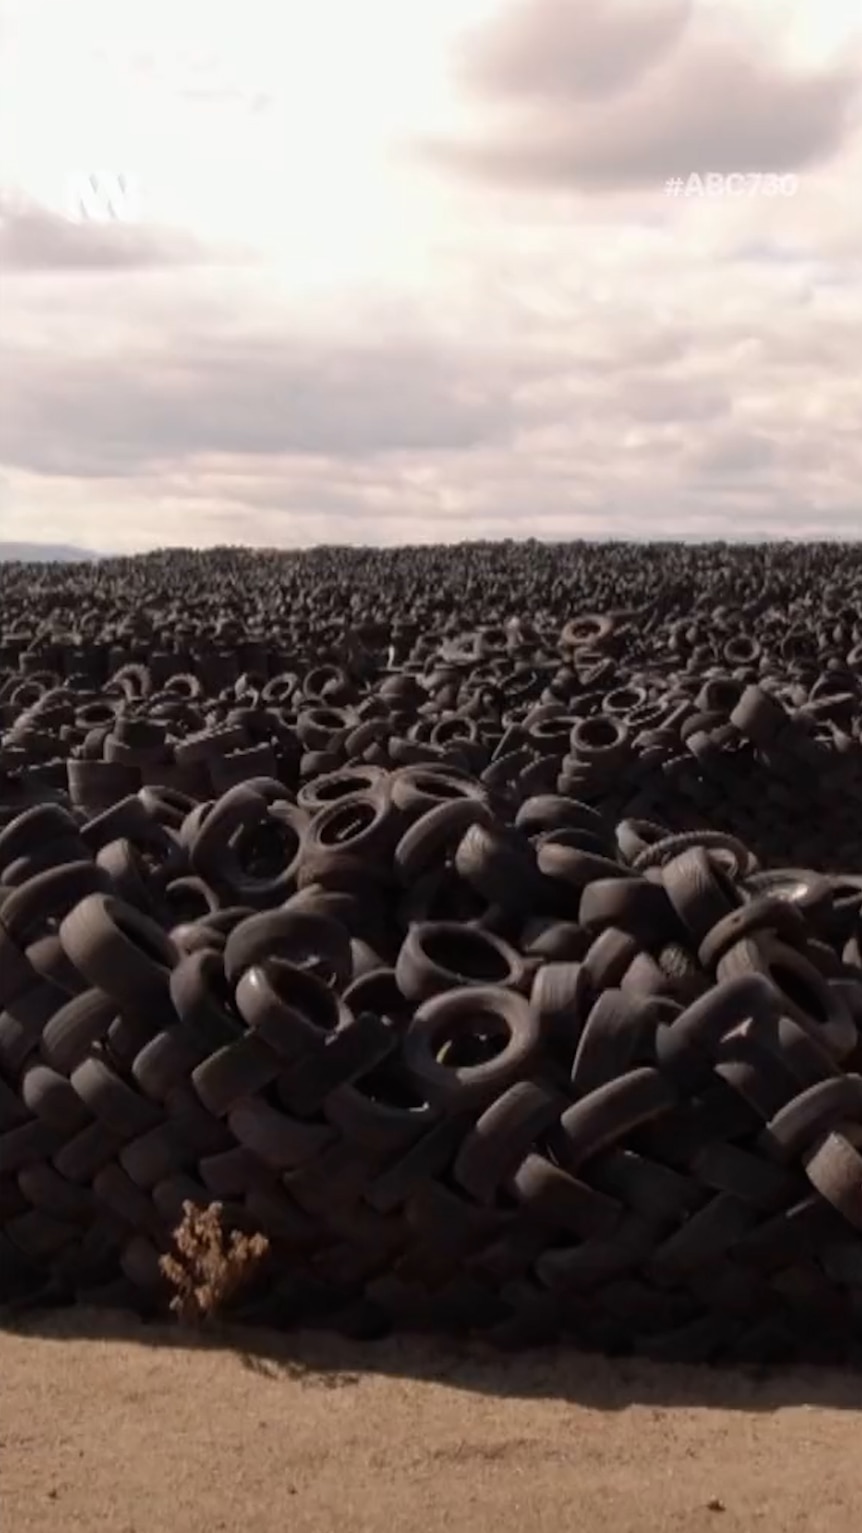 Piles and piles of tyres